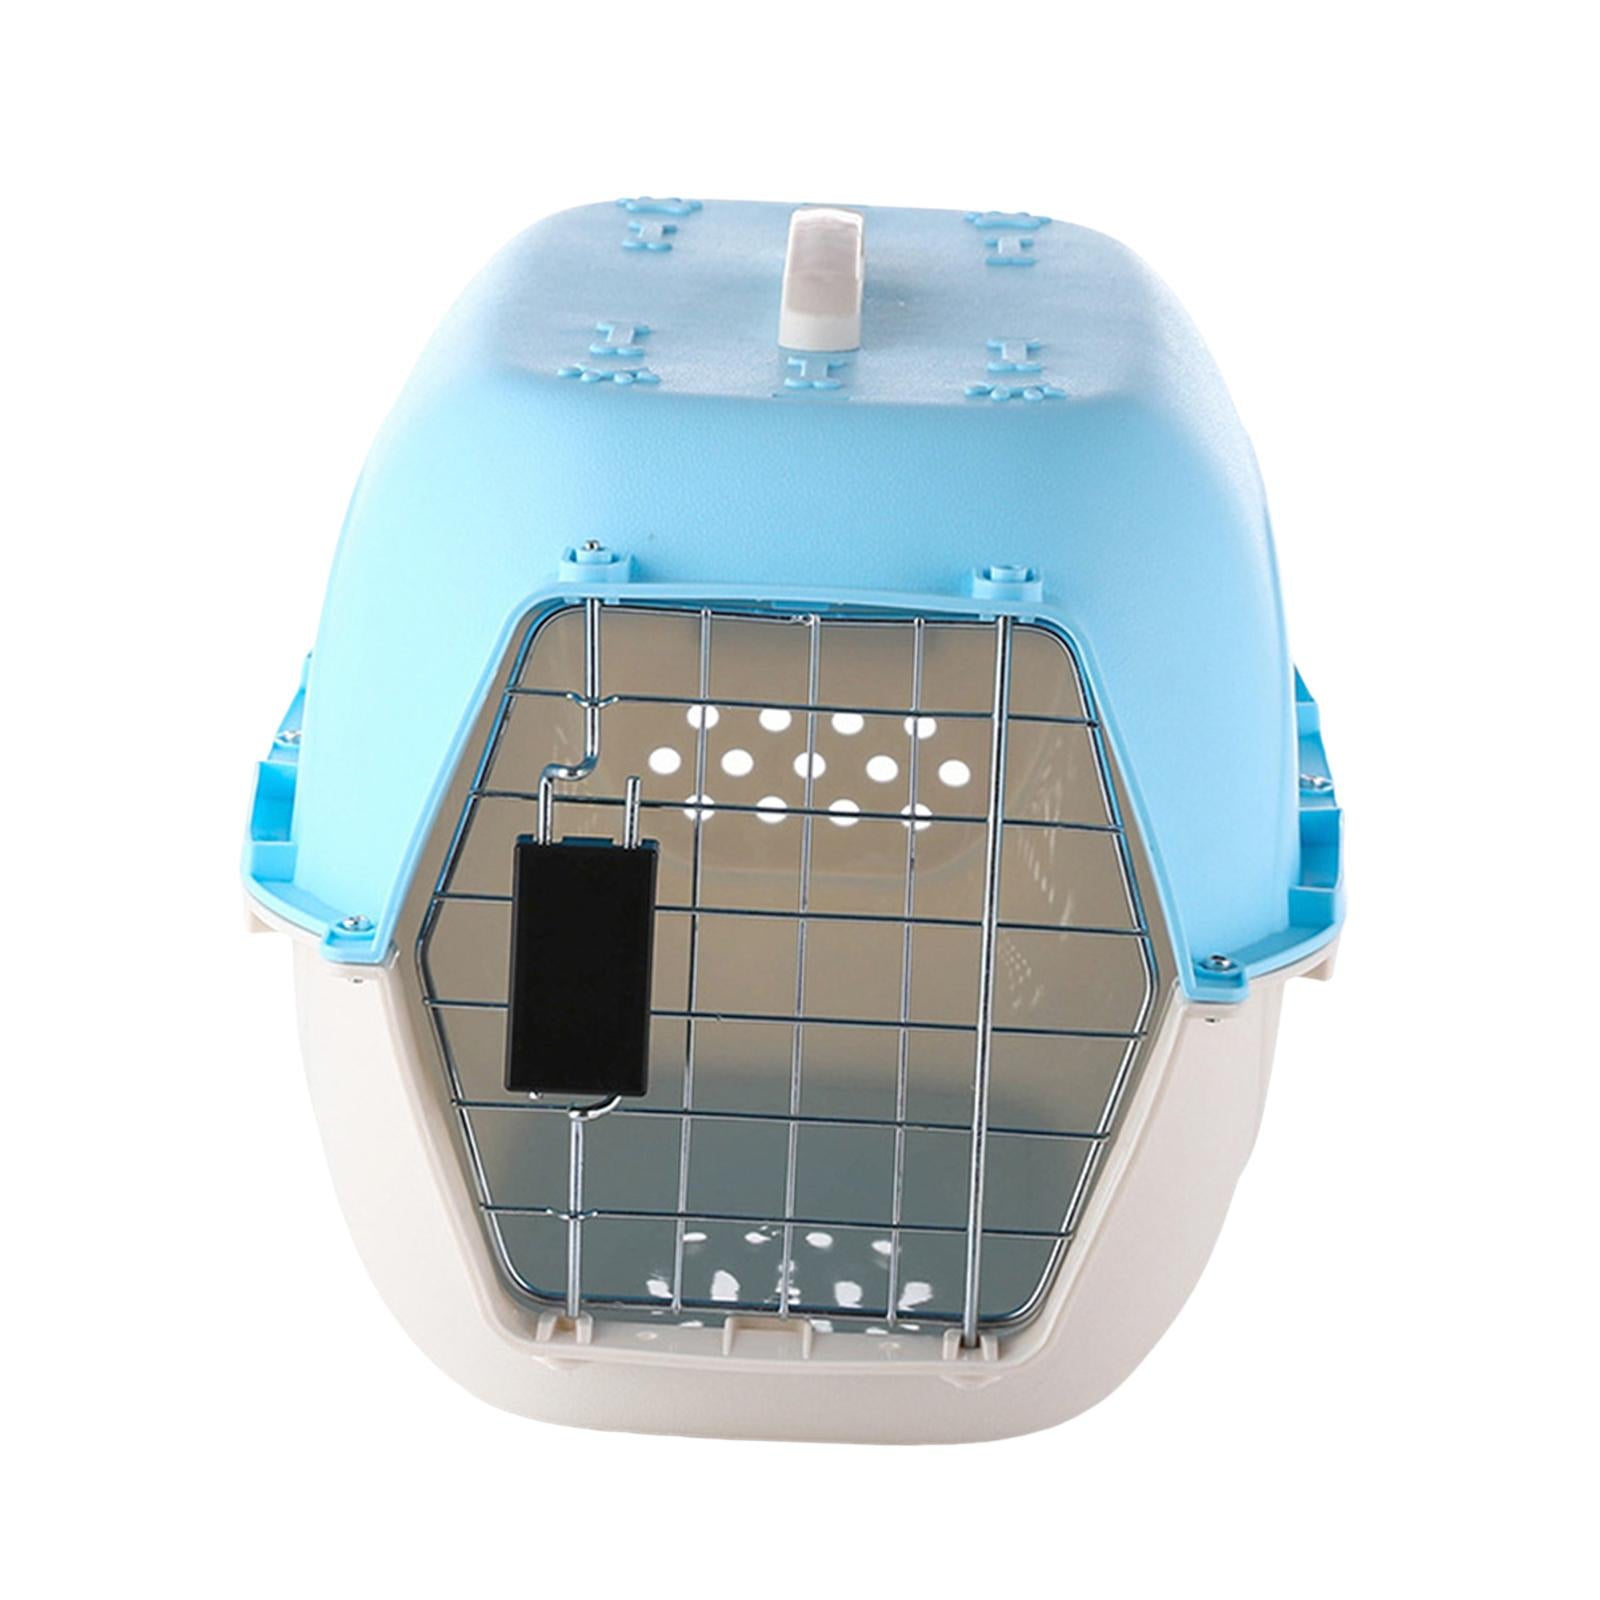 Portable Hard Sided Travel Carriers Kennel Tote Case Airline Carrying Breathable Cat Dog Cage for Puppy Rabbits Traveling Walking Hiking ， 58x40x36cm Blue